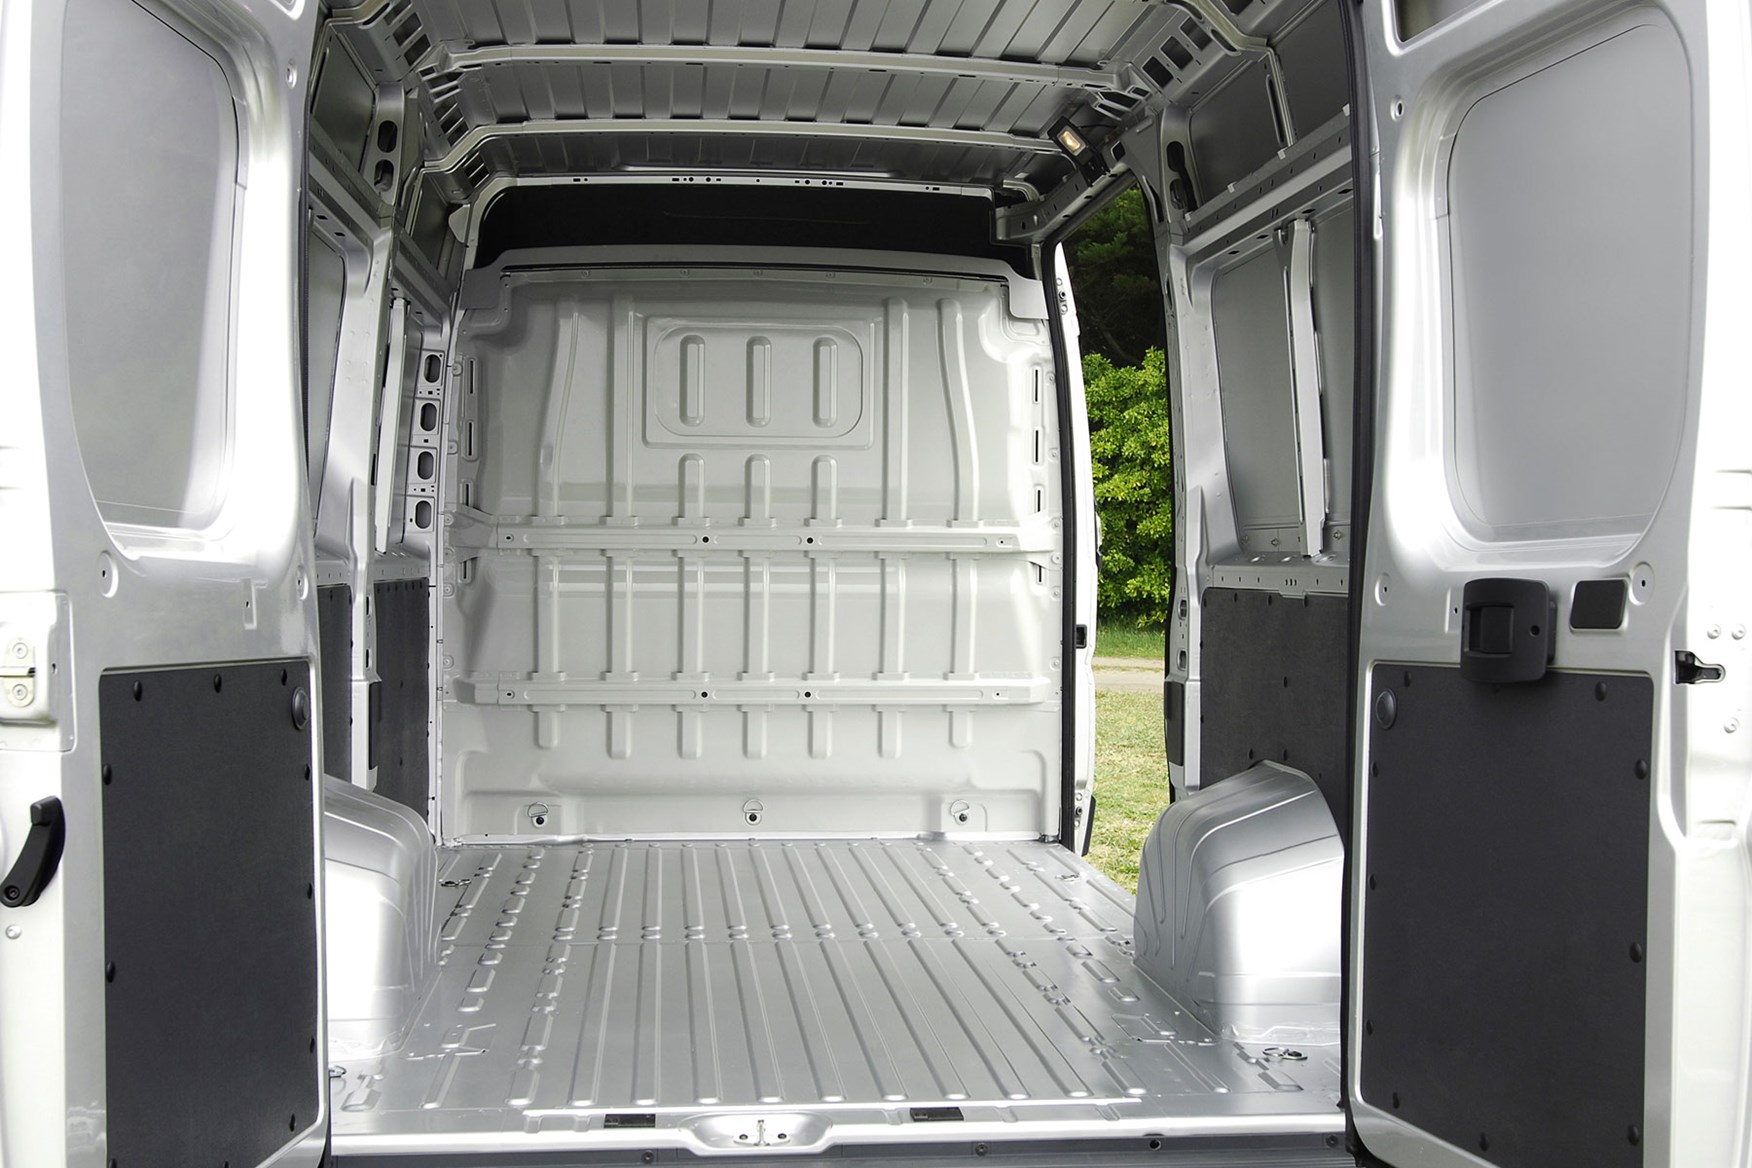 Peugeot Boxer dimensions - load area through rear doors, unlined, silver